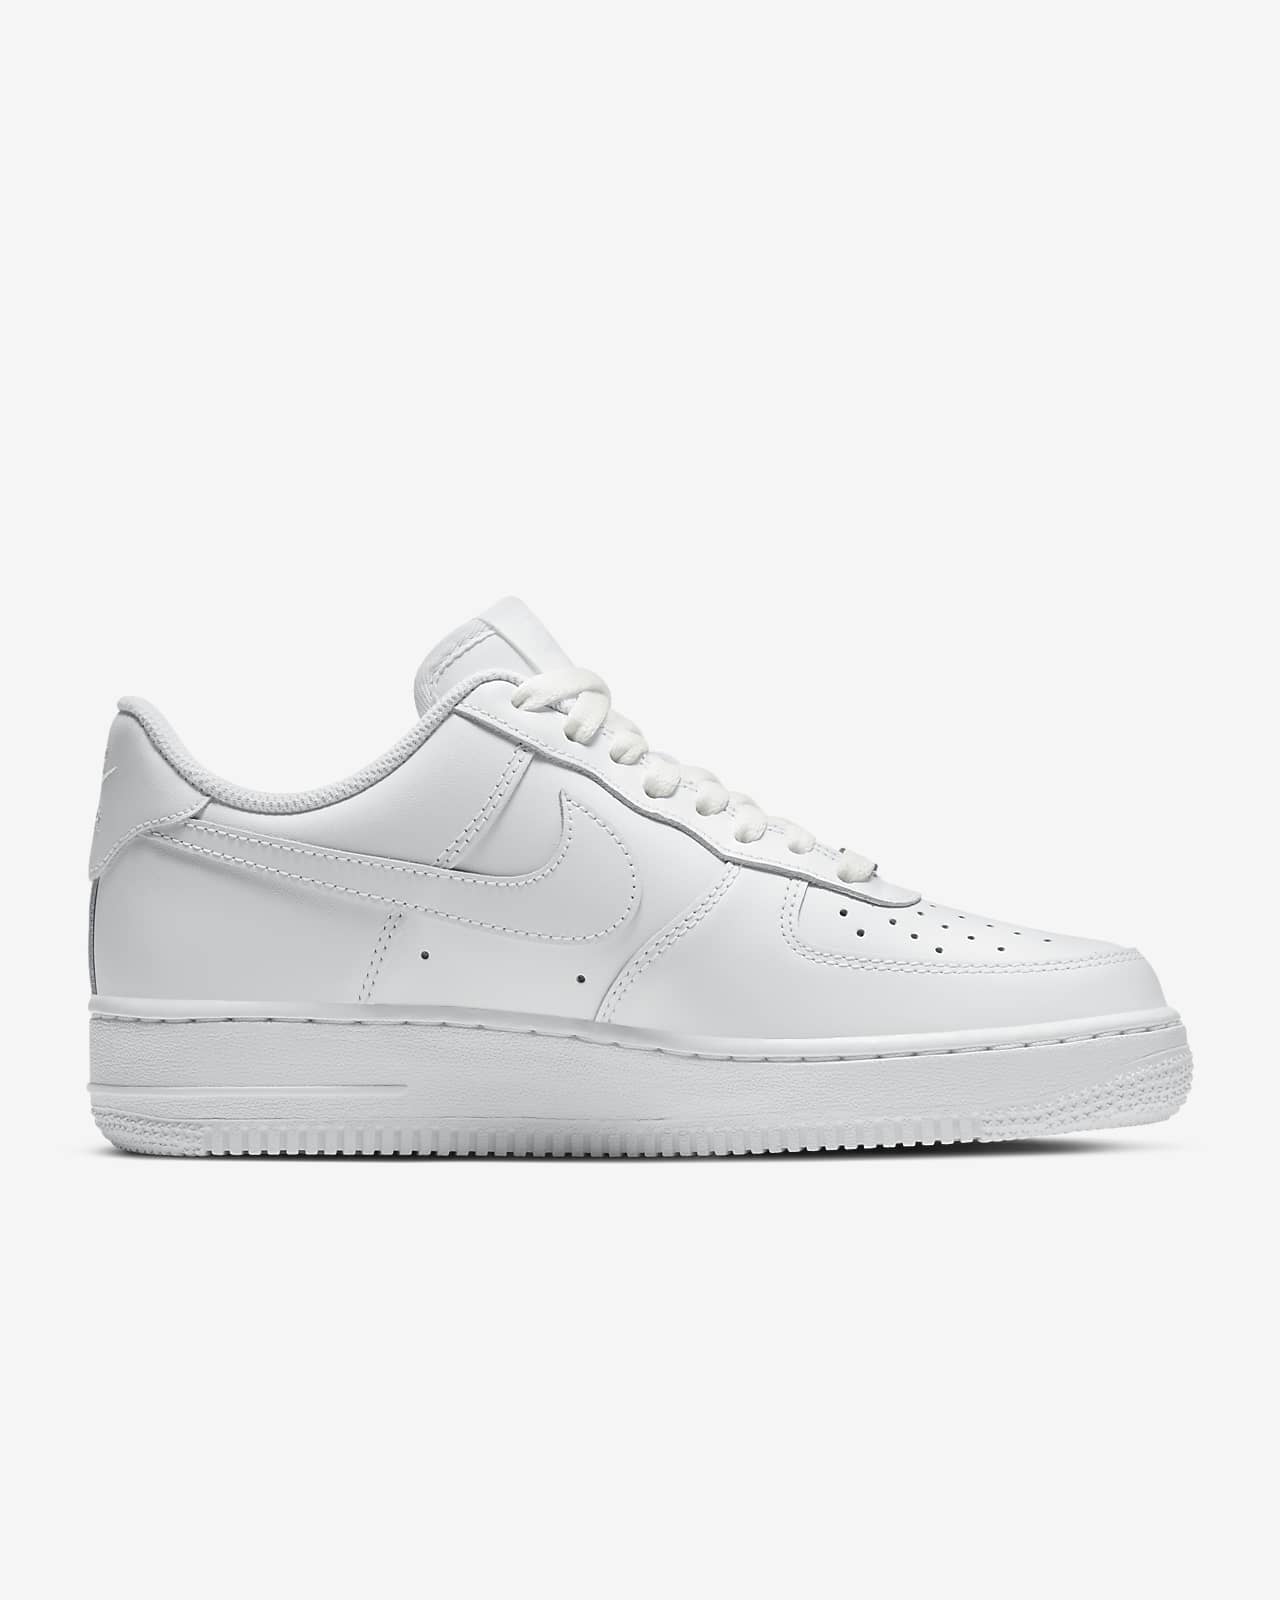 Nike Air Force 1 '07 Women's Shoes ورق الريحان